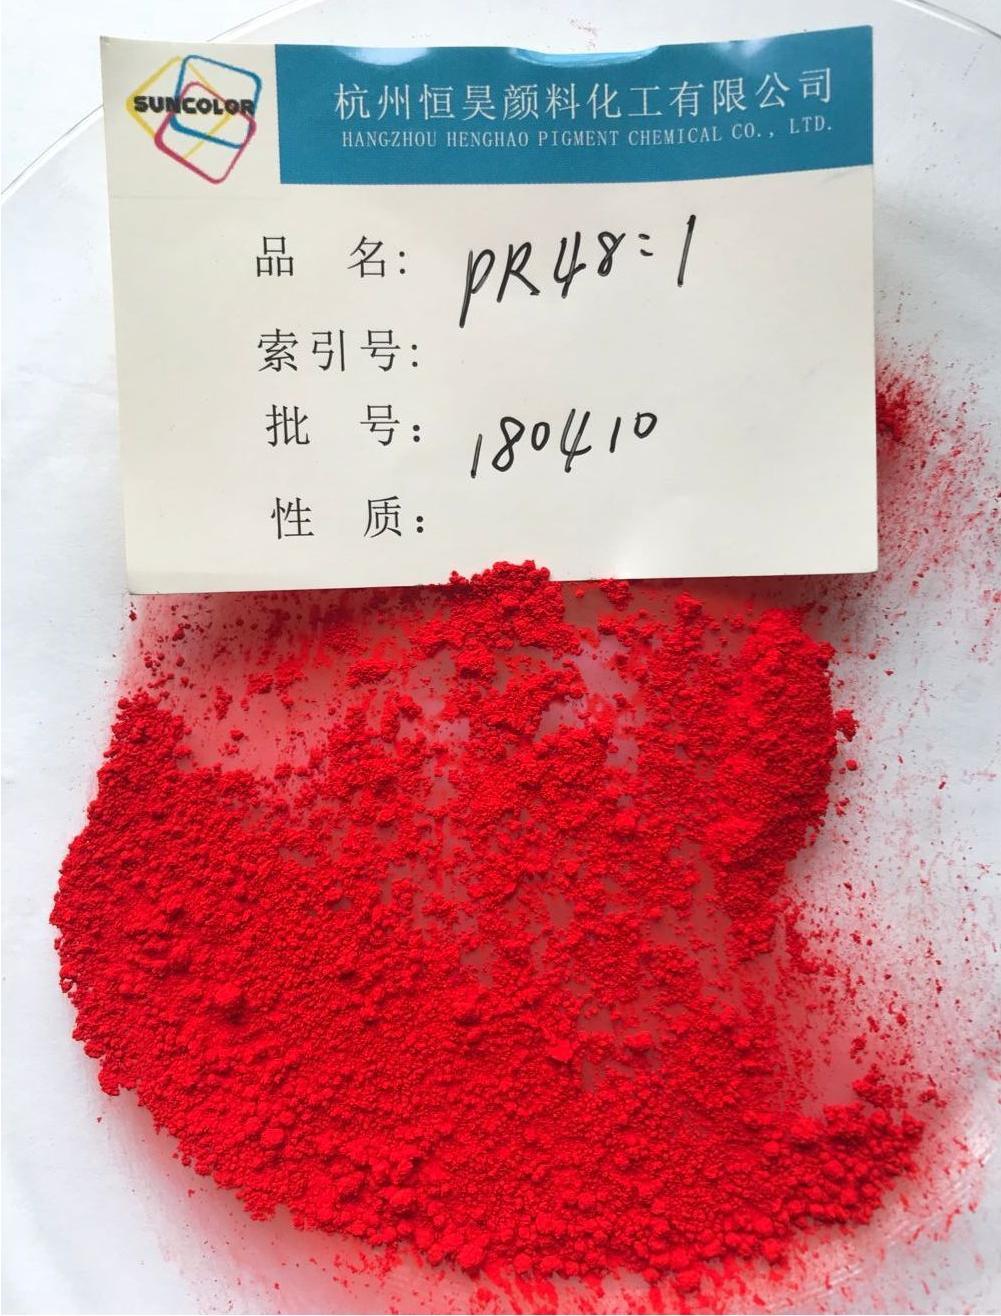 Pigment Red 48: 1 - Fast Red BBN for Plastic